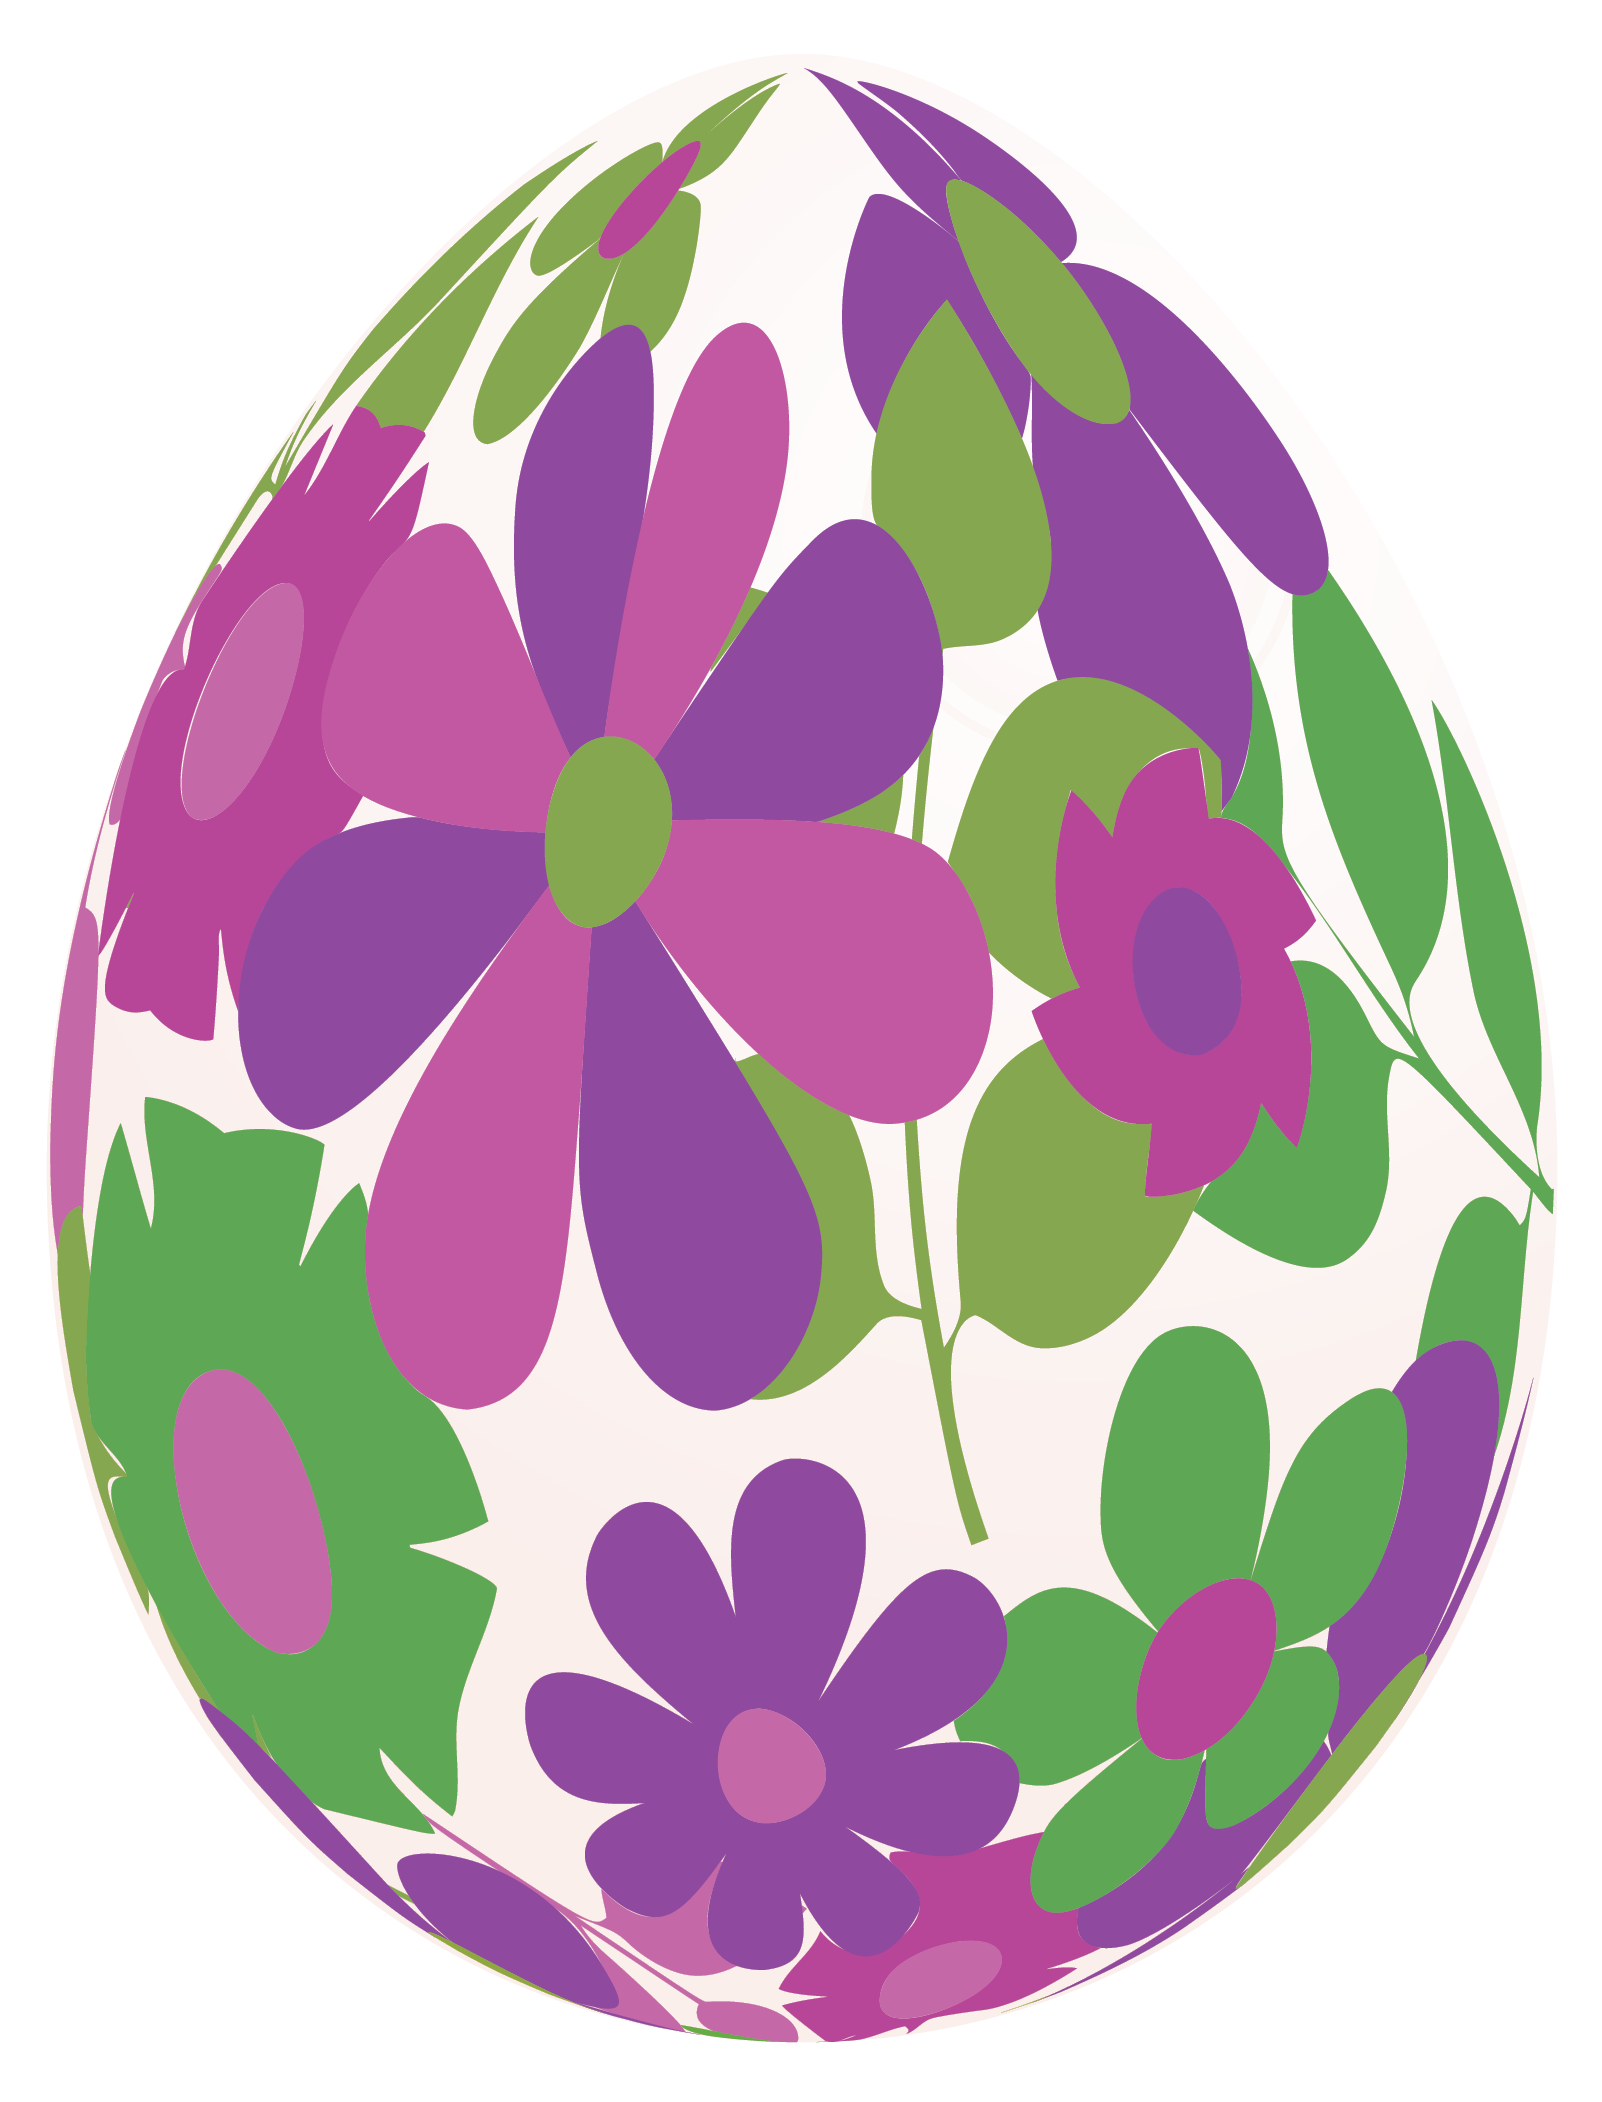 Easter Flowers Clip Art Background 1 HD Wallpapers | amagico.